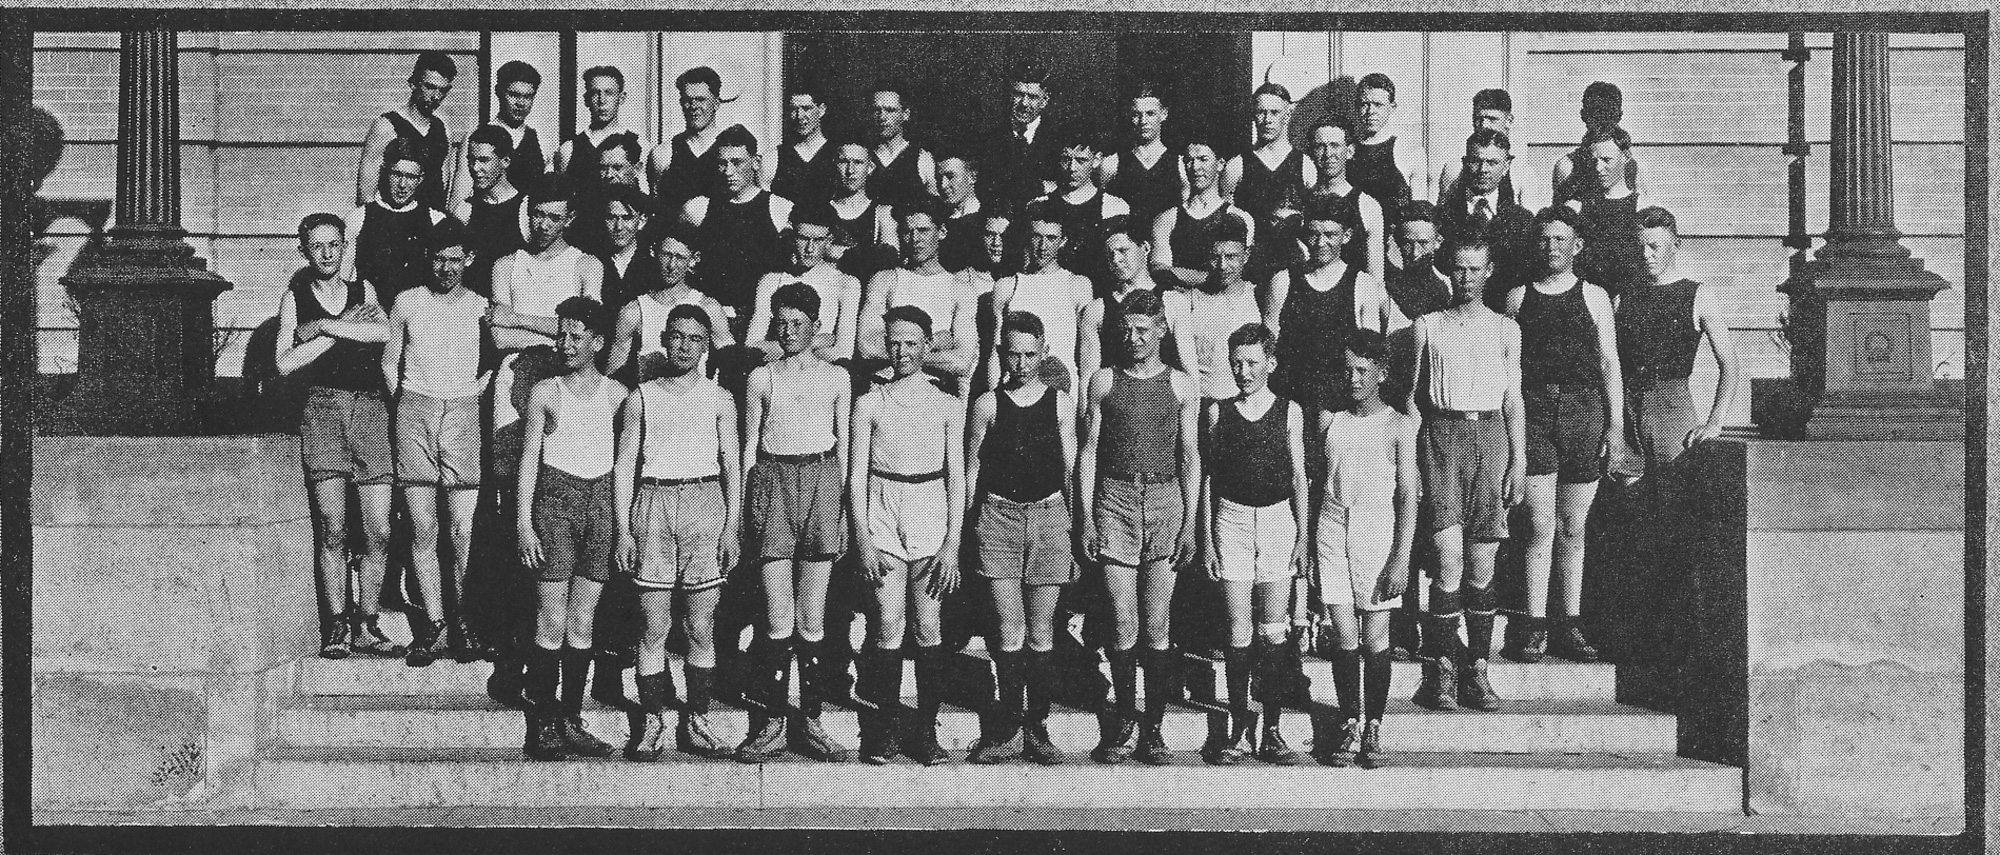 Dauth Family Archive - 1921 - Spud Yearbook -  June Dauth Basketball Yearbook Photo Entire Team